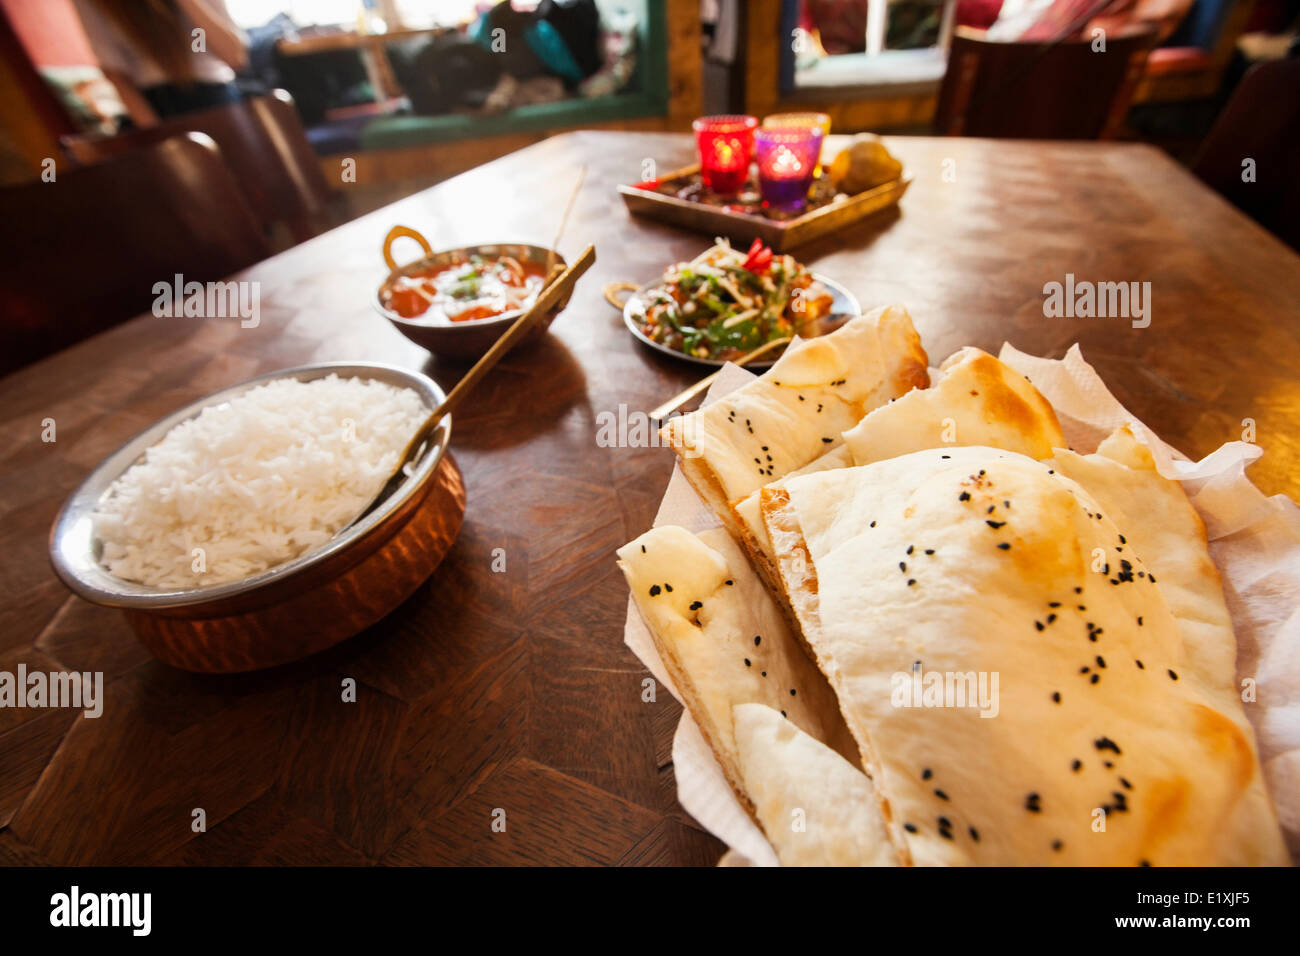 Close-up of fresh food served at table in restaurant Stock Photo